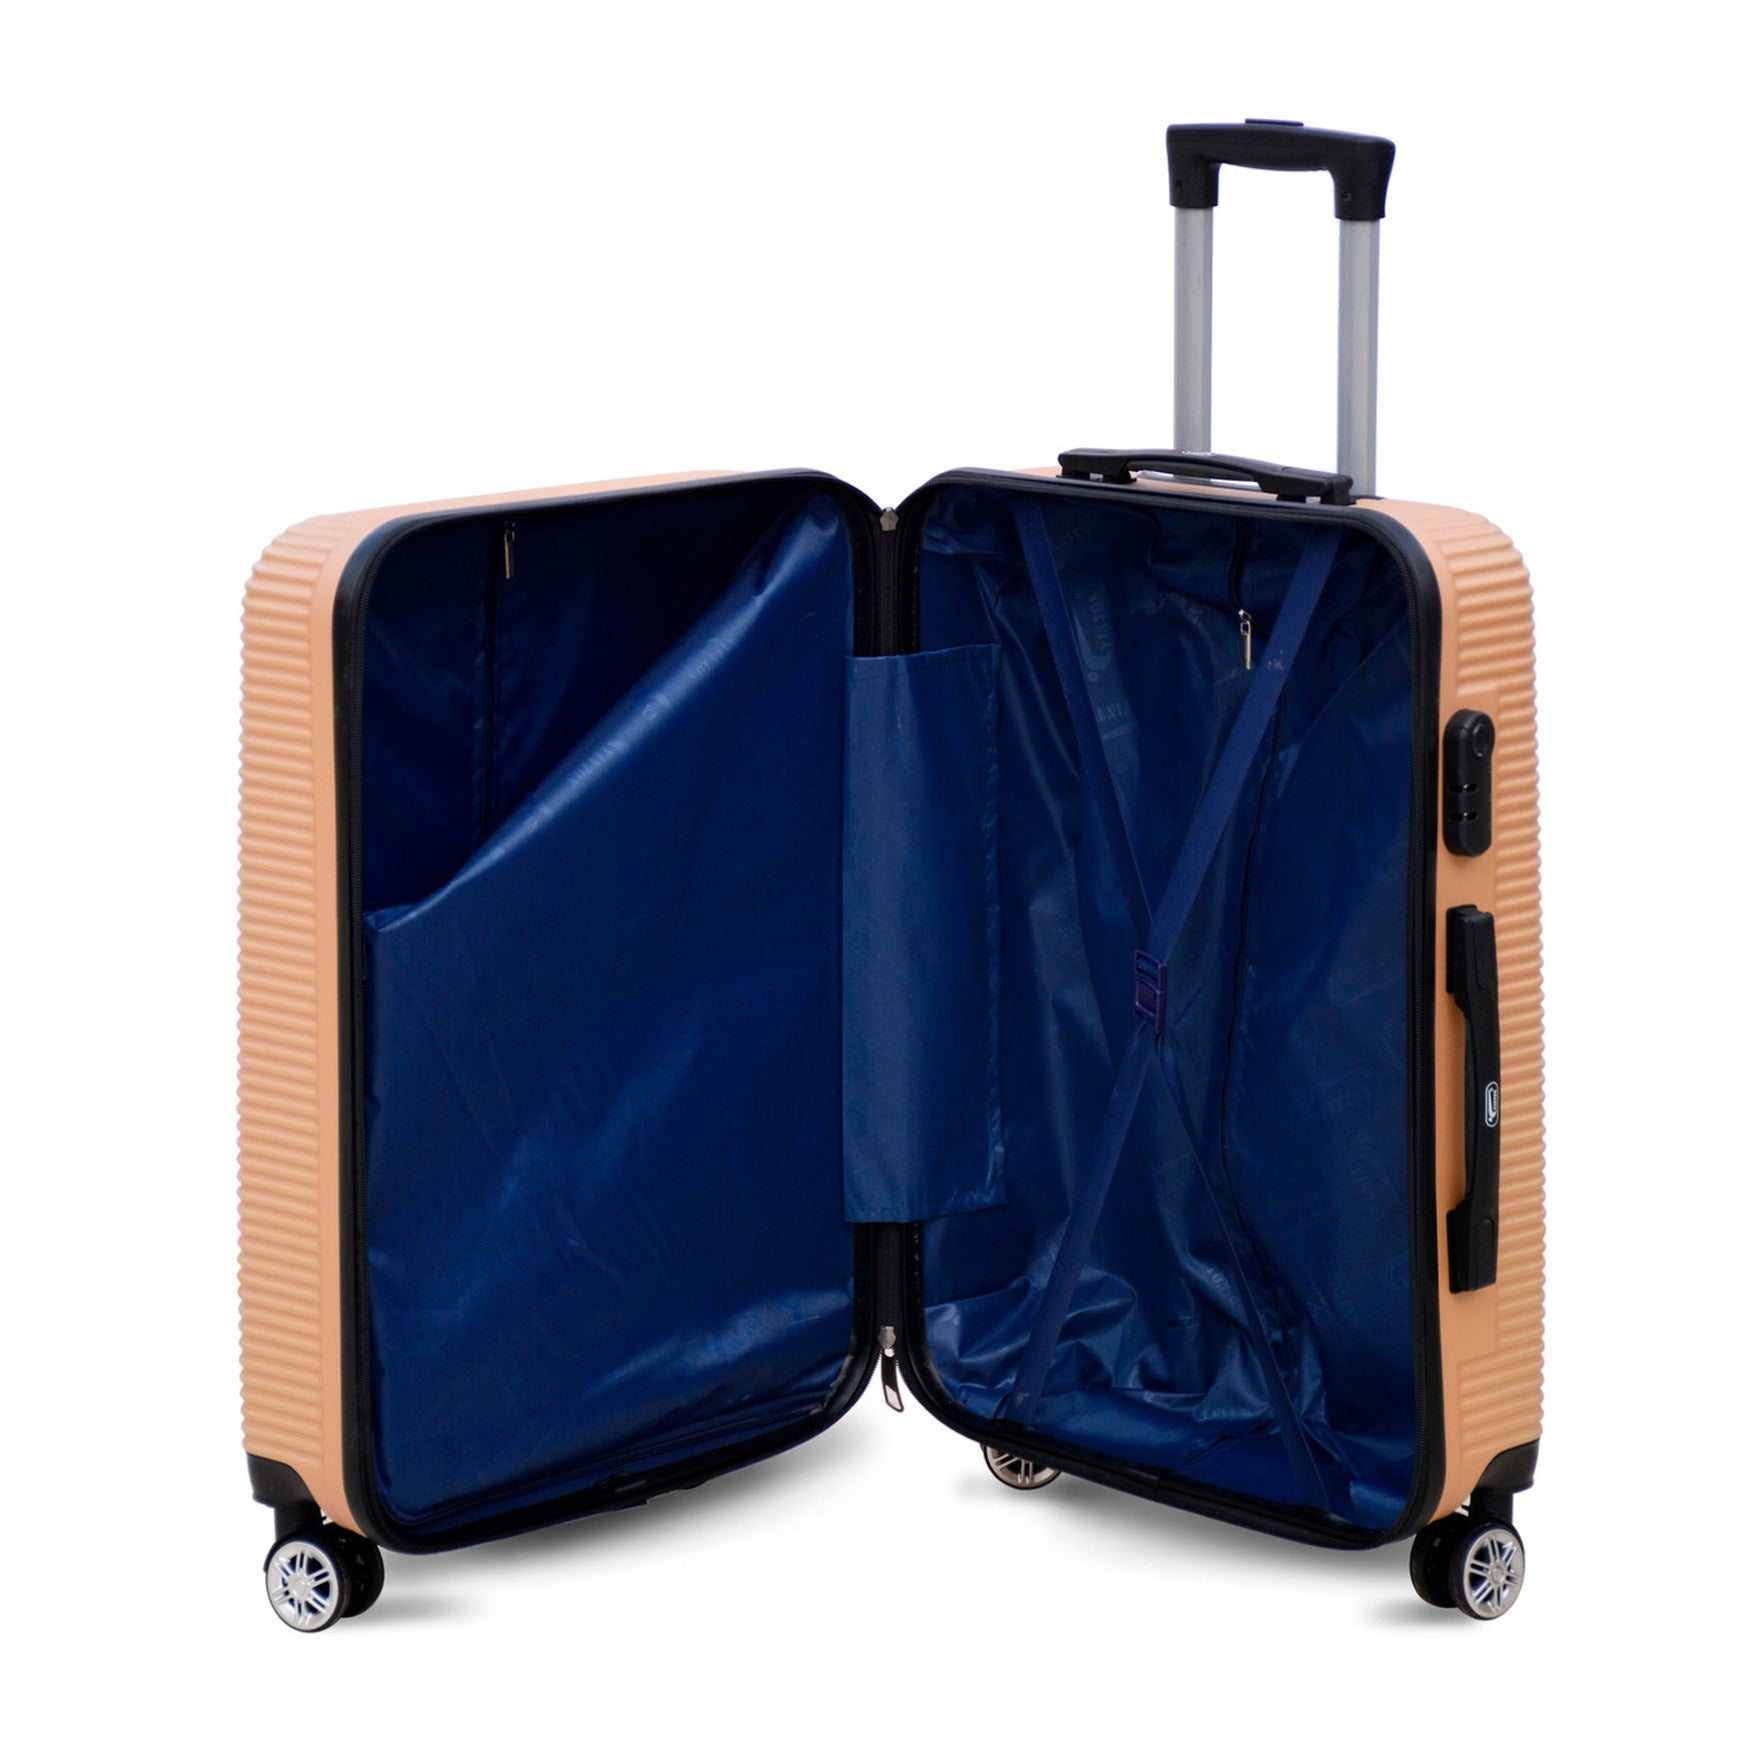 20" Gold Colour JIAN ABS Line Luggage Lightweight Hard Case Carry On Trolley Bag With Spinner Wheel Zaappy.com